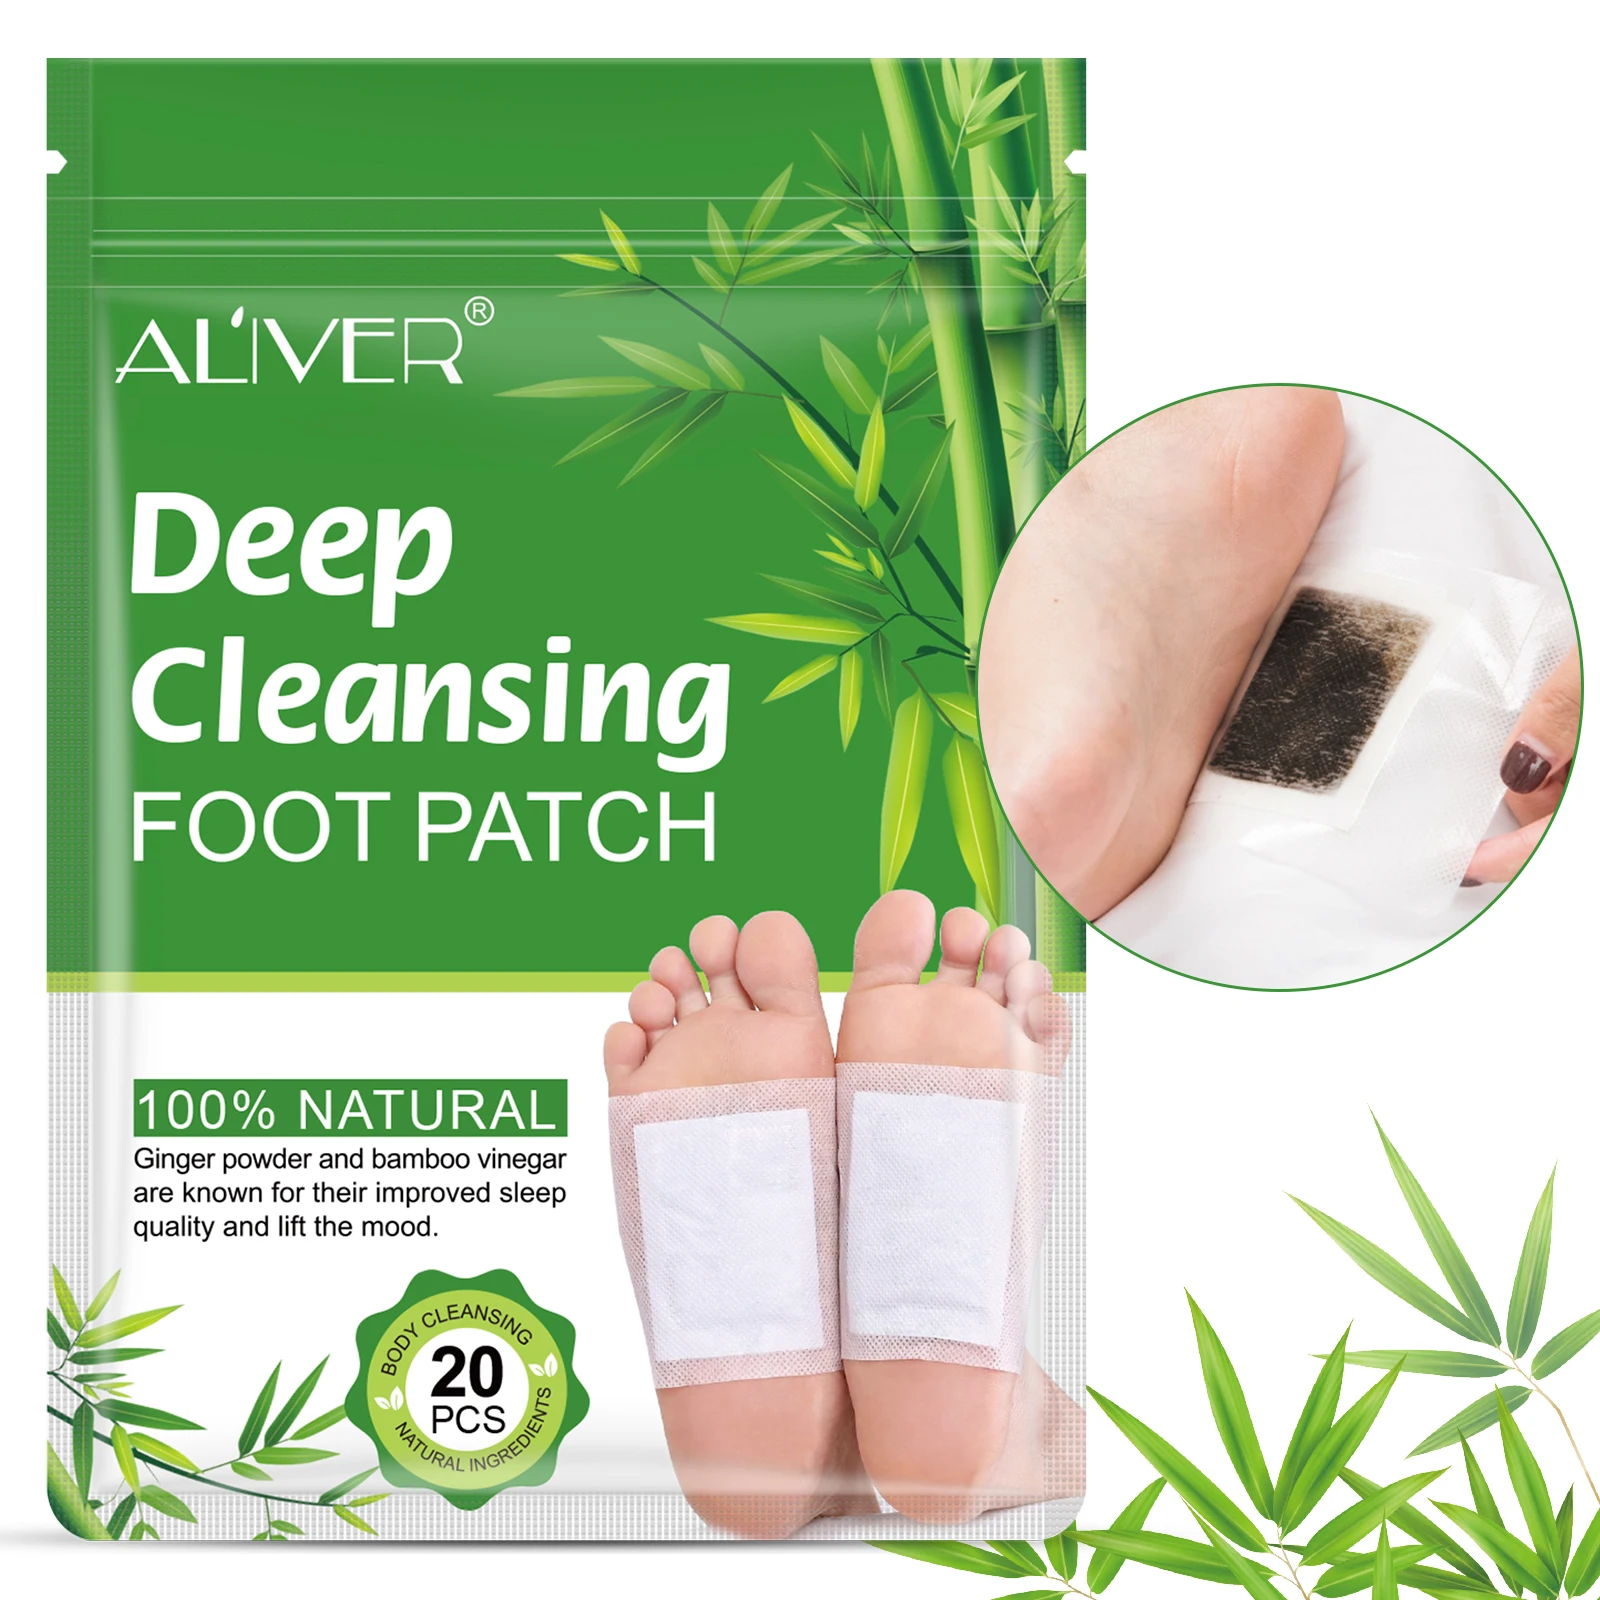 

ALIVER 20Pcs Detox Foot Patches Natural Herbal Bamboo Vinegar Deep Cleansing Foot Patch